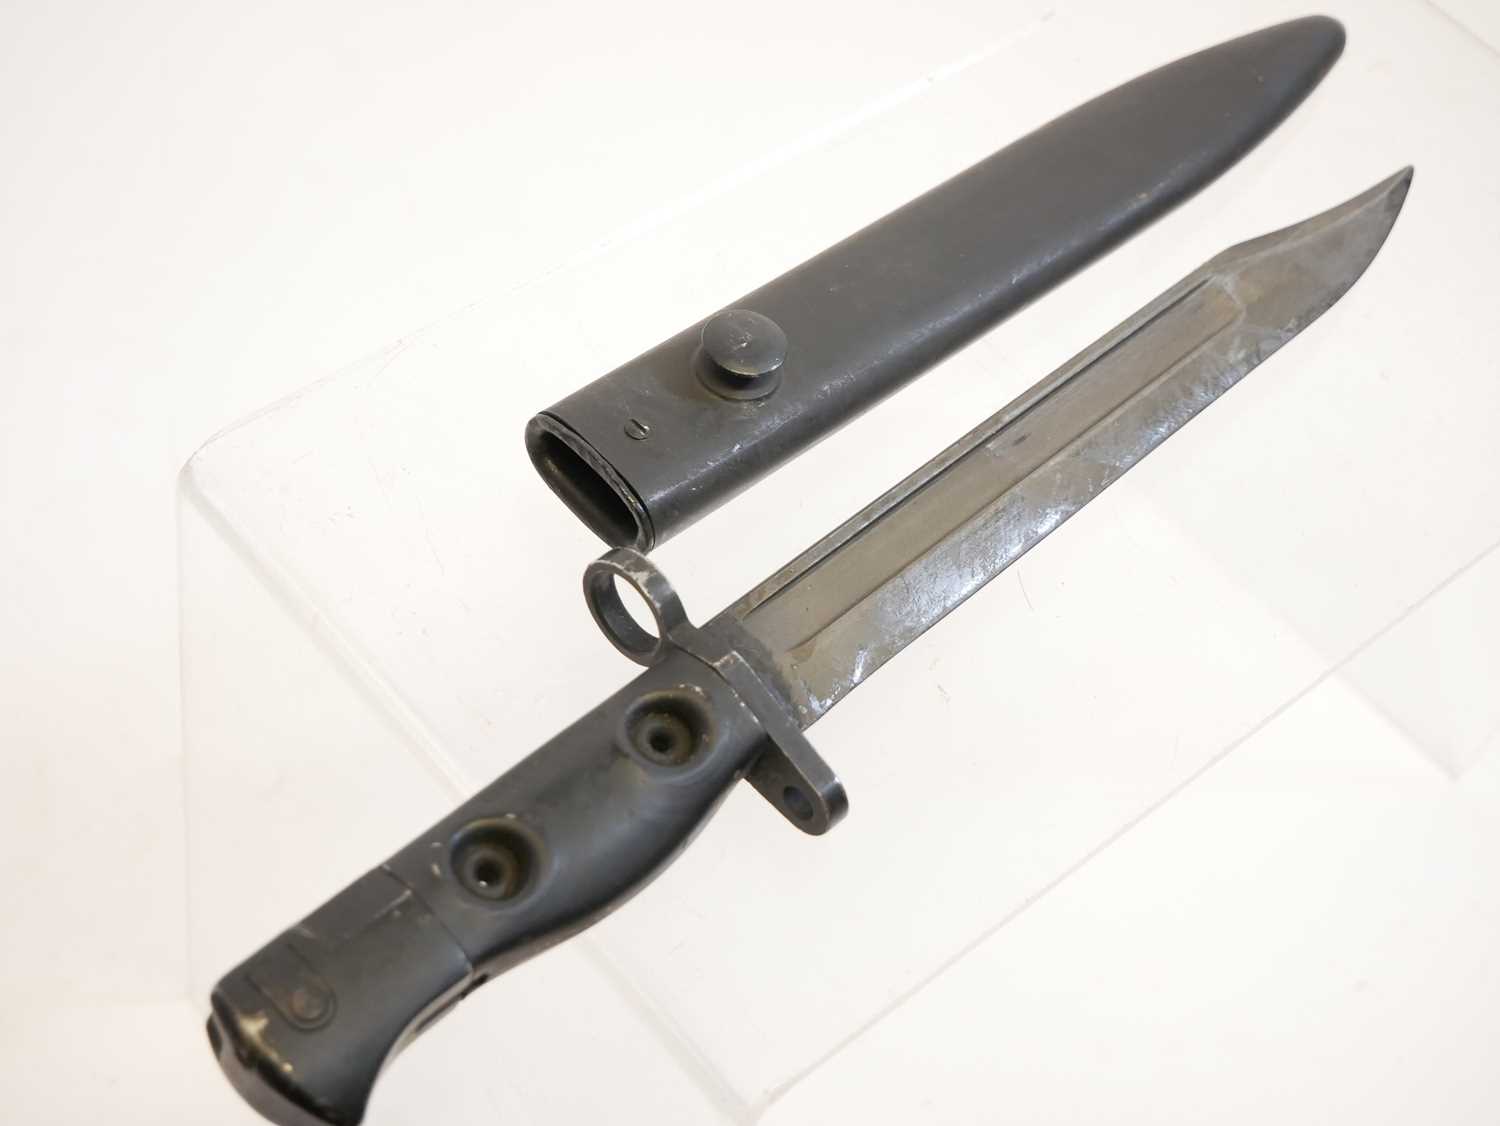 L1A3 SLR bayonet and scabbard, finished black all over, the grip stamped L1A3 960-0257 B. Buyer must - Image 4 of 7